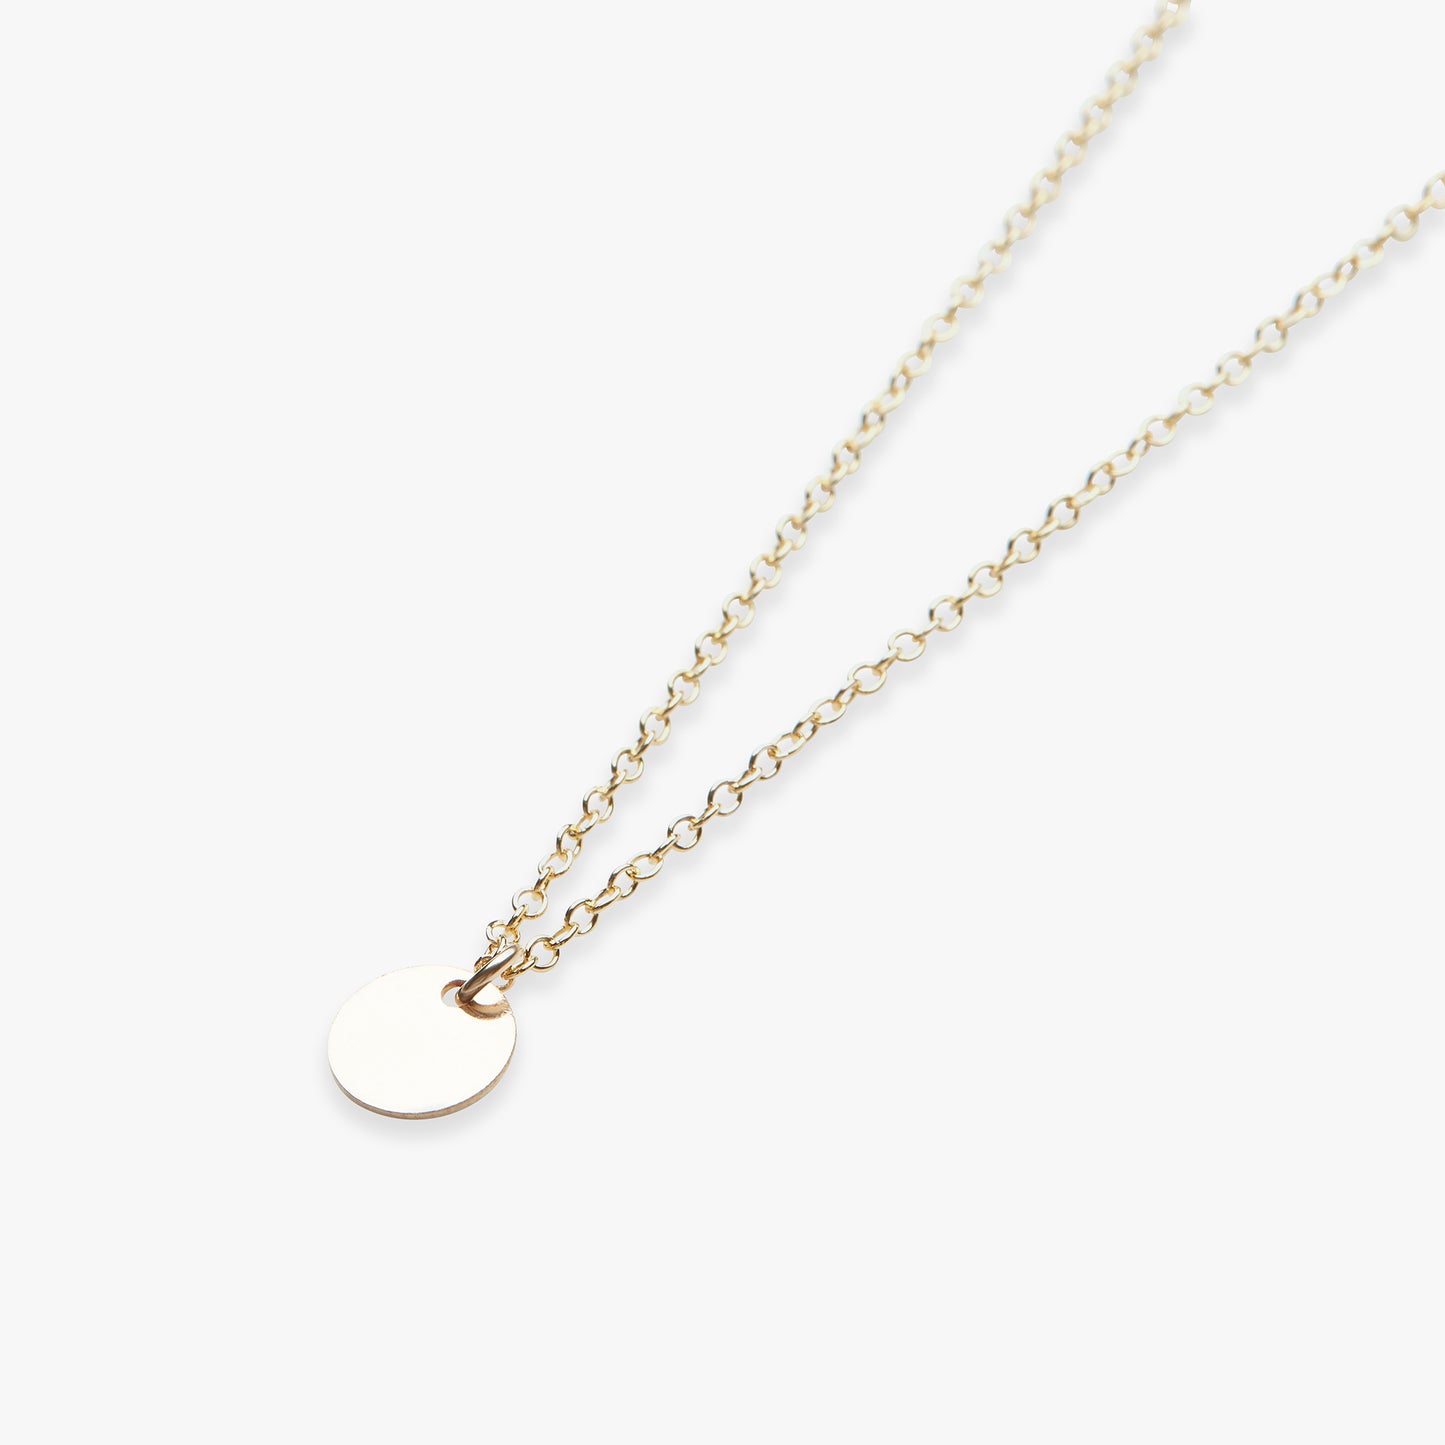 Mini coin necklace gold filled